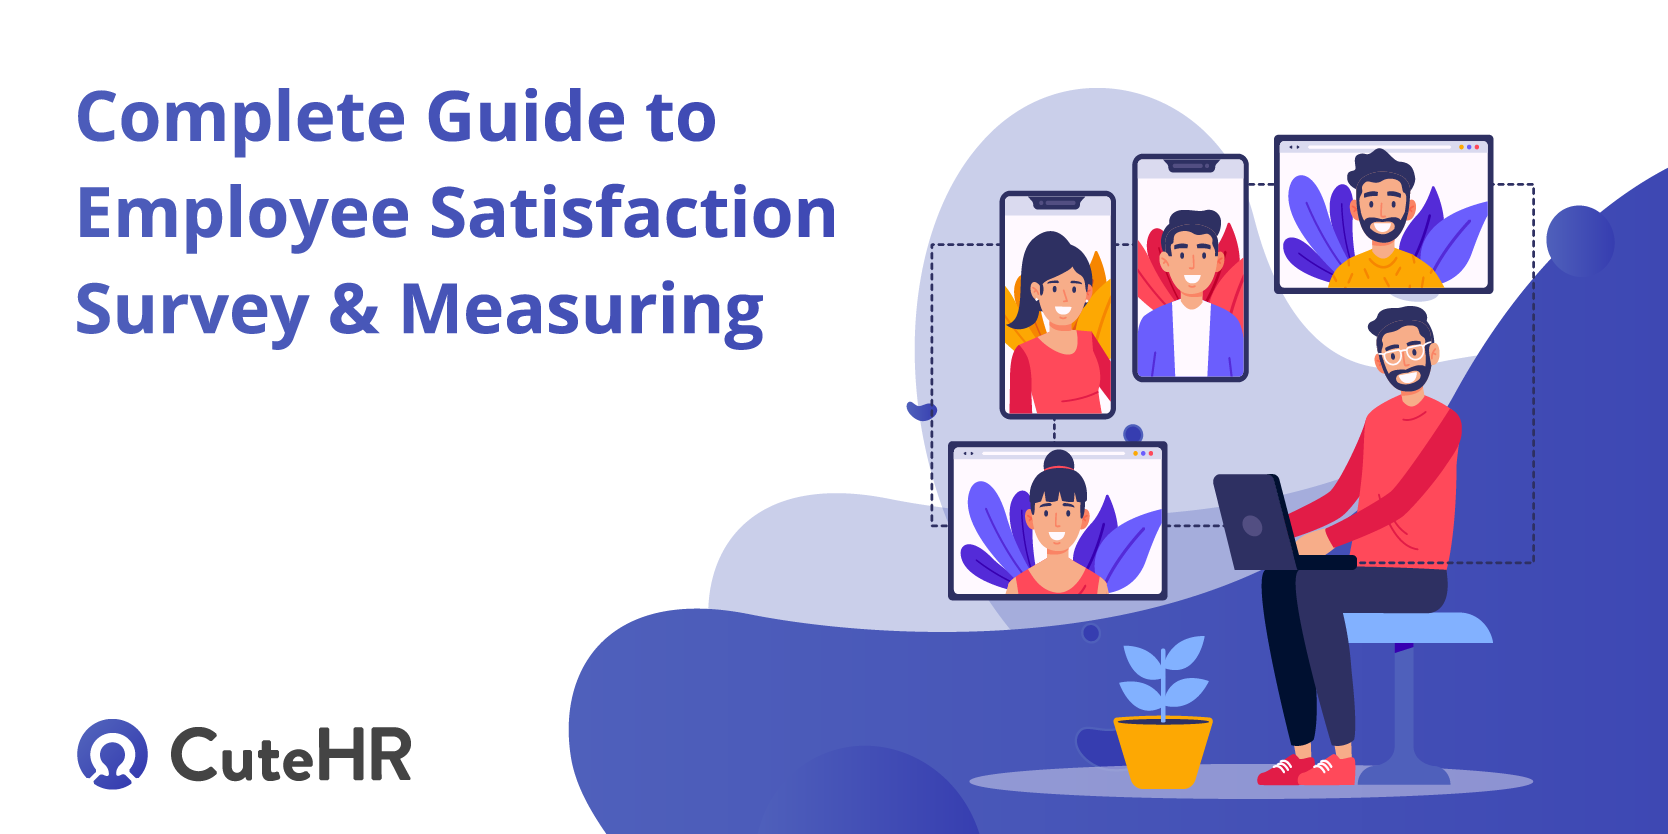 Complete Guide to Employee Satisfaction Survey & Measuring